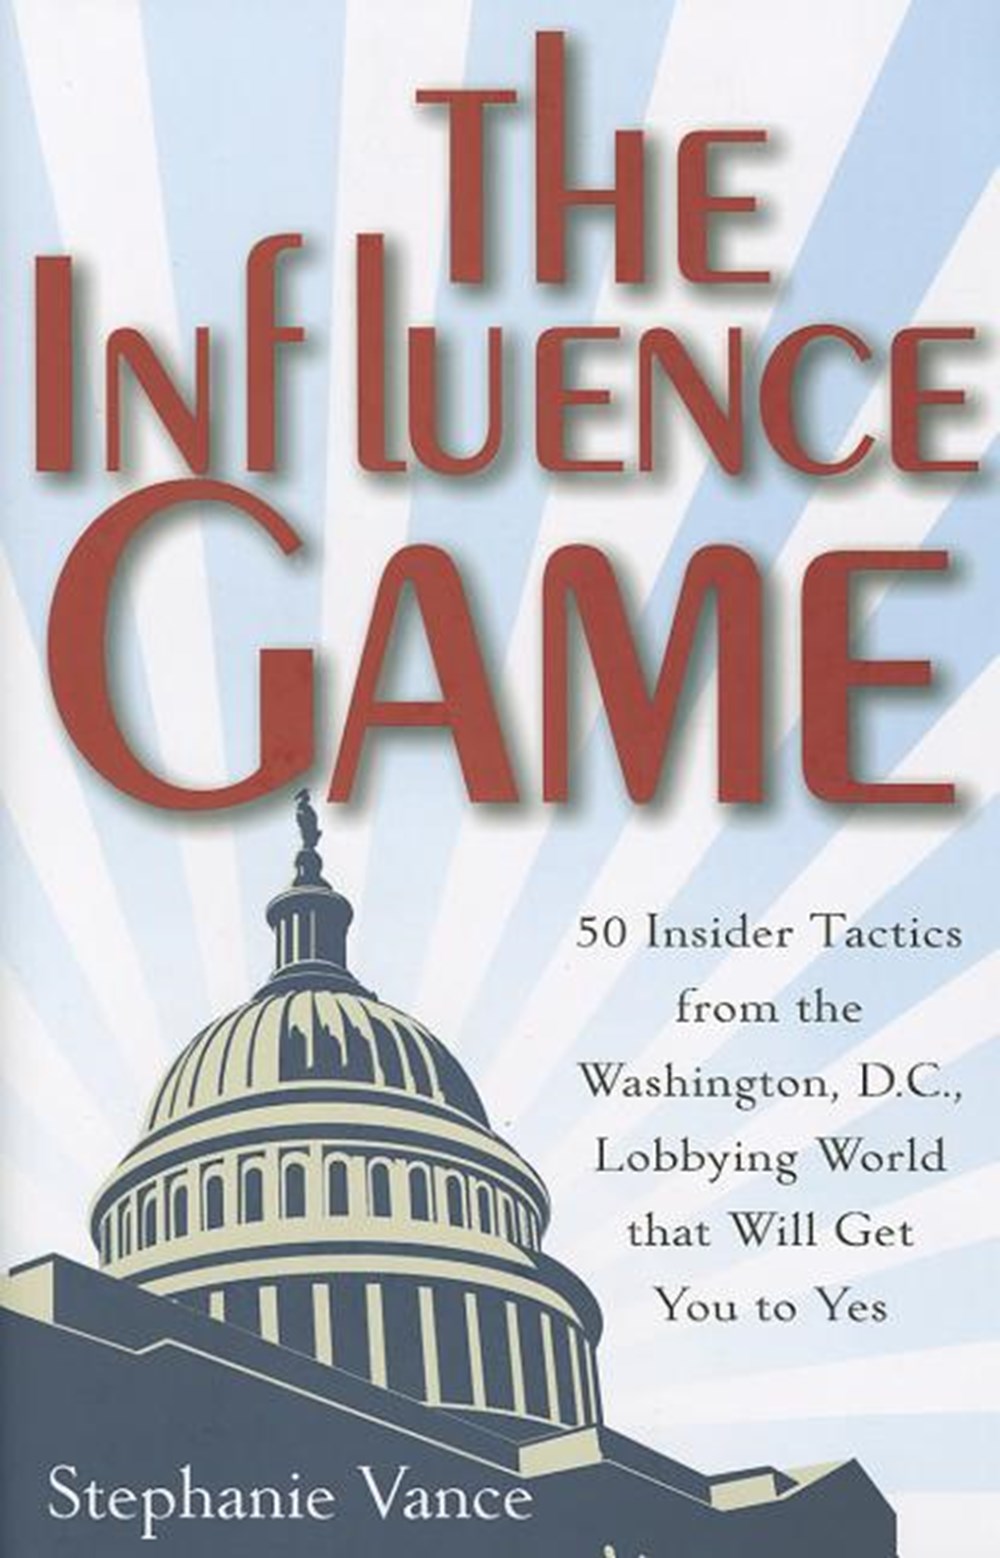 Influence Game 50 Insider Tactics from the Washington, D.C. Lobbying World That Will Get You to Yes